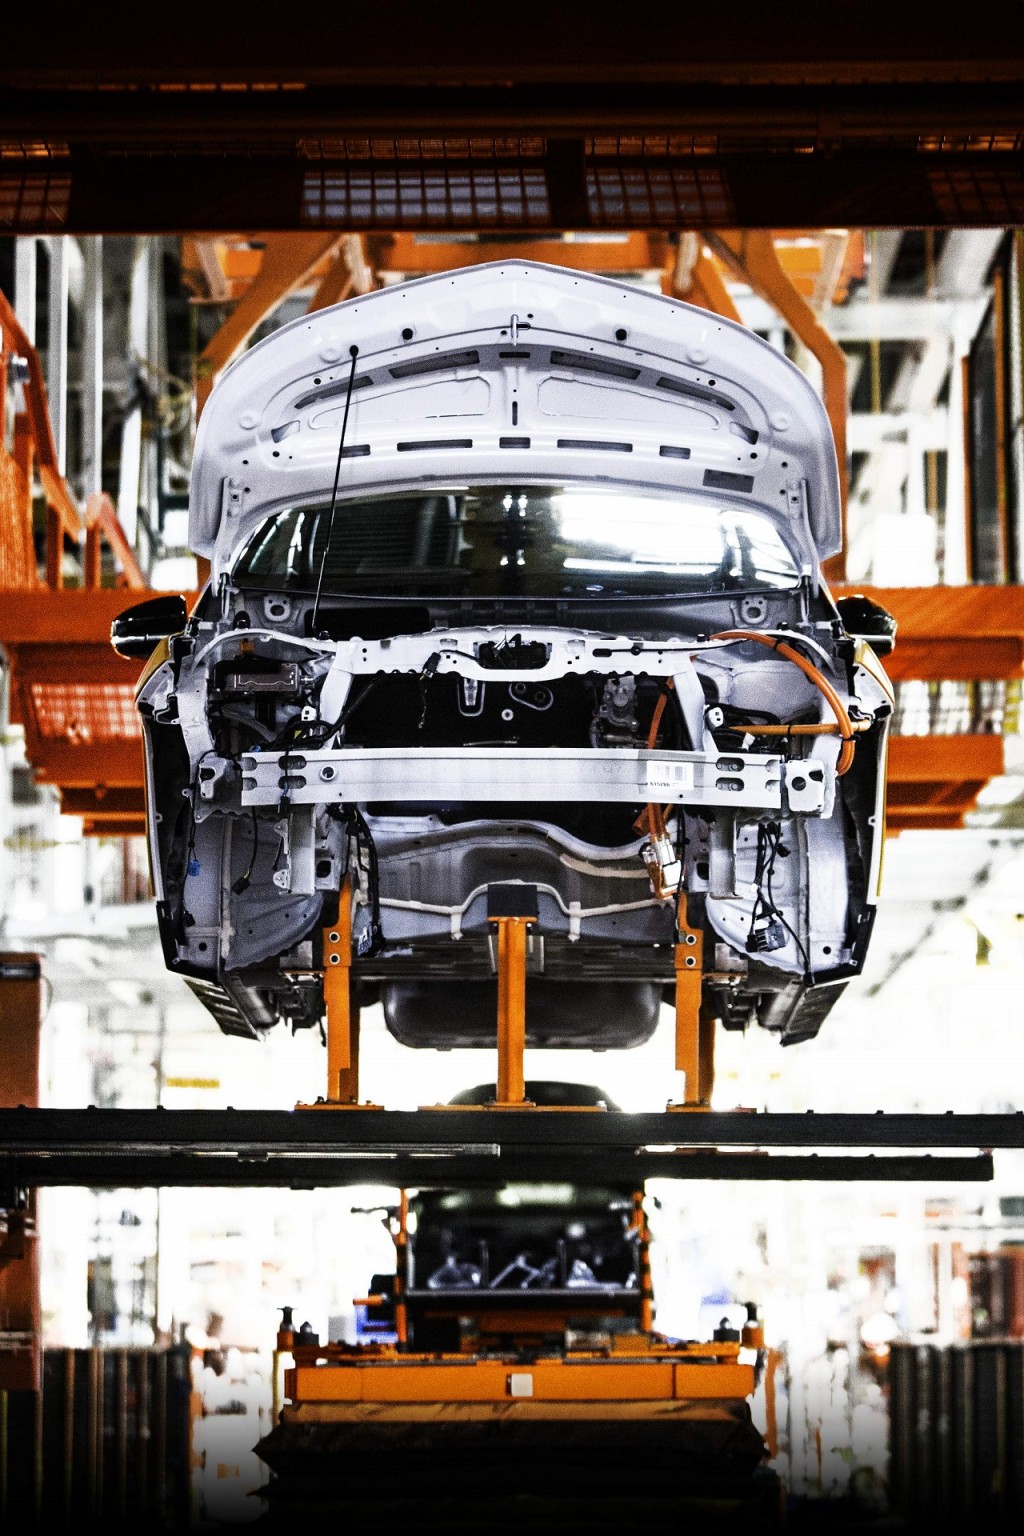 2017 Chevrolet Bolt EV pre-production vehicles at Orion Township Assembly Plant, March 2016